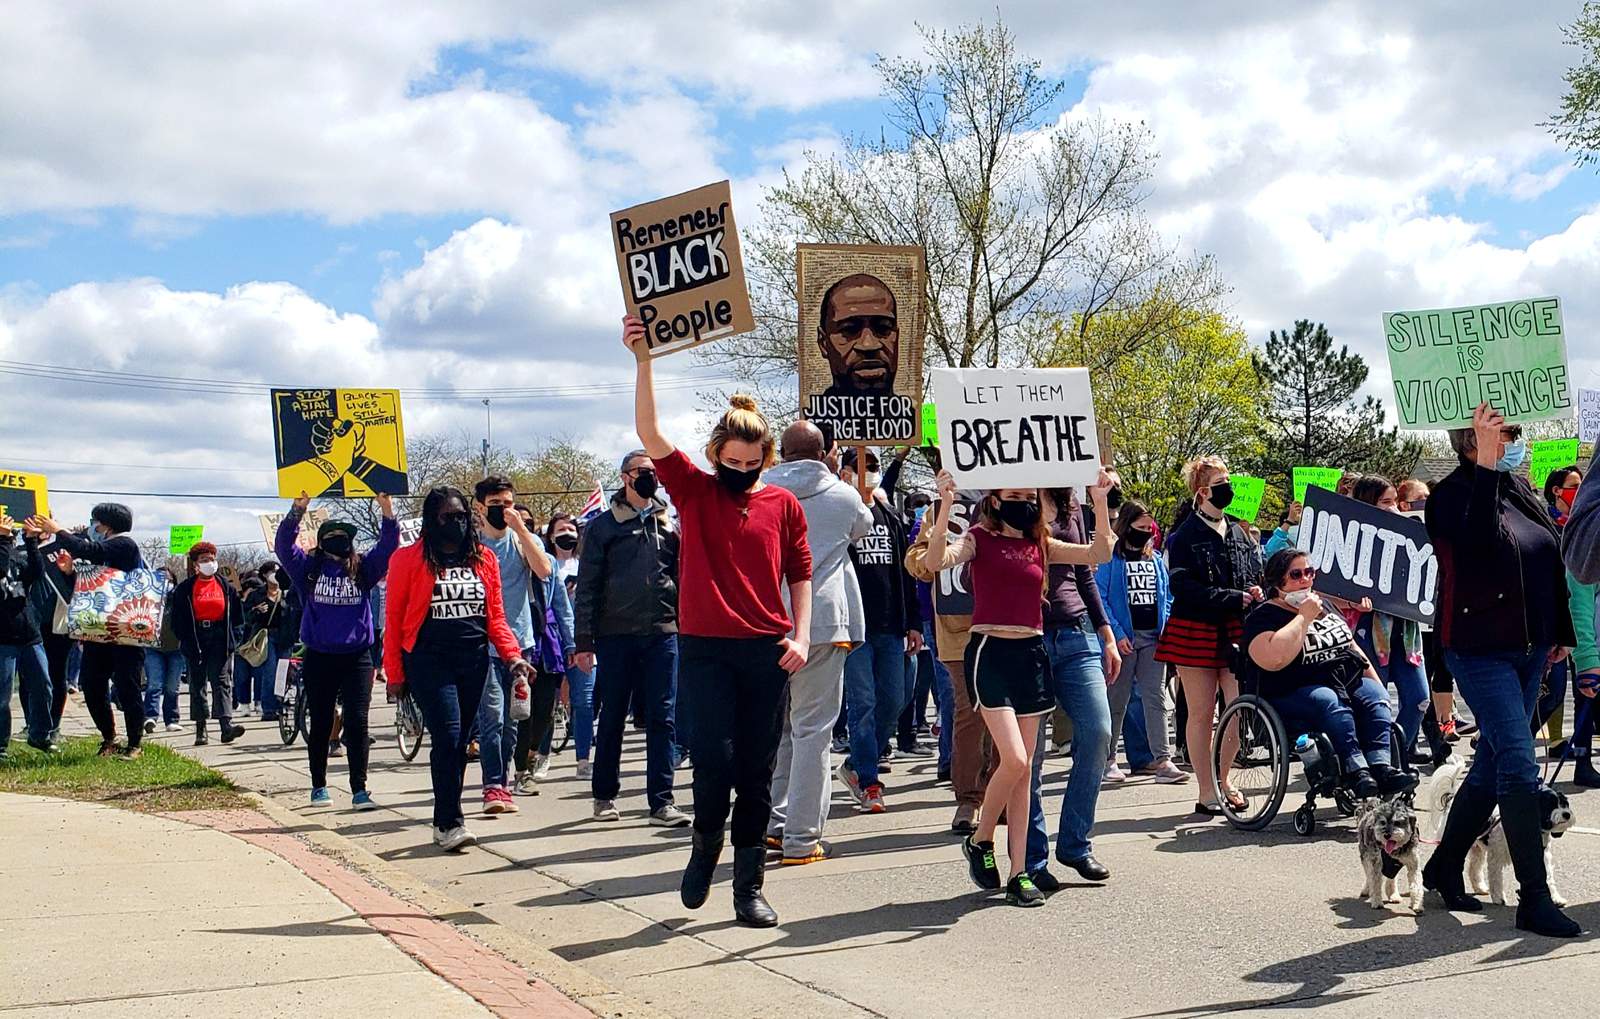 PHOTOS: Protestors take to the streets in Ann Arbor